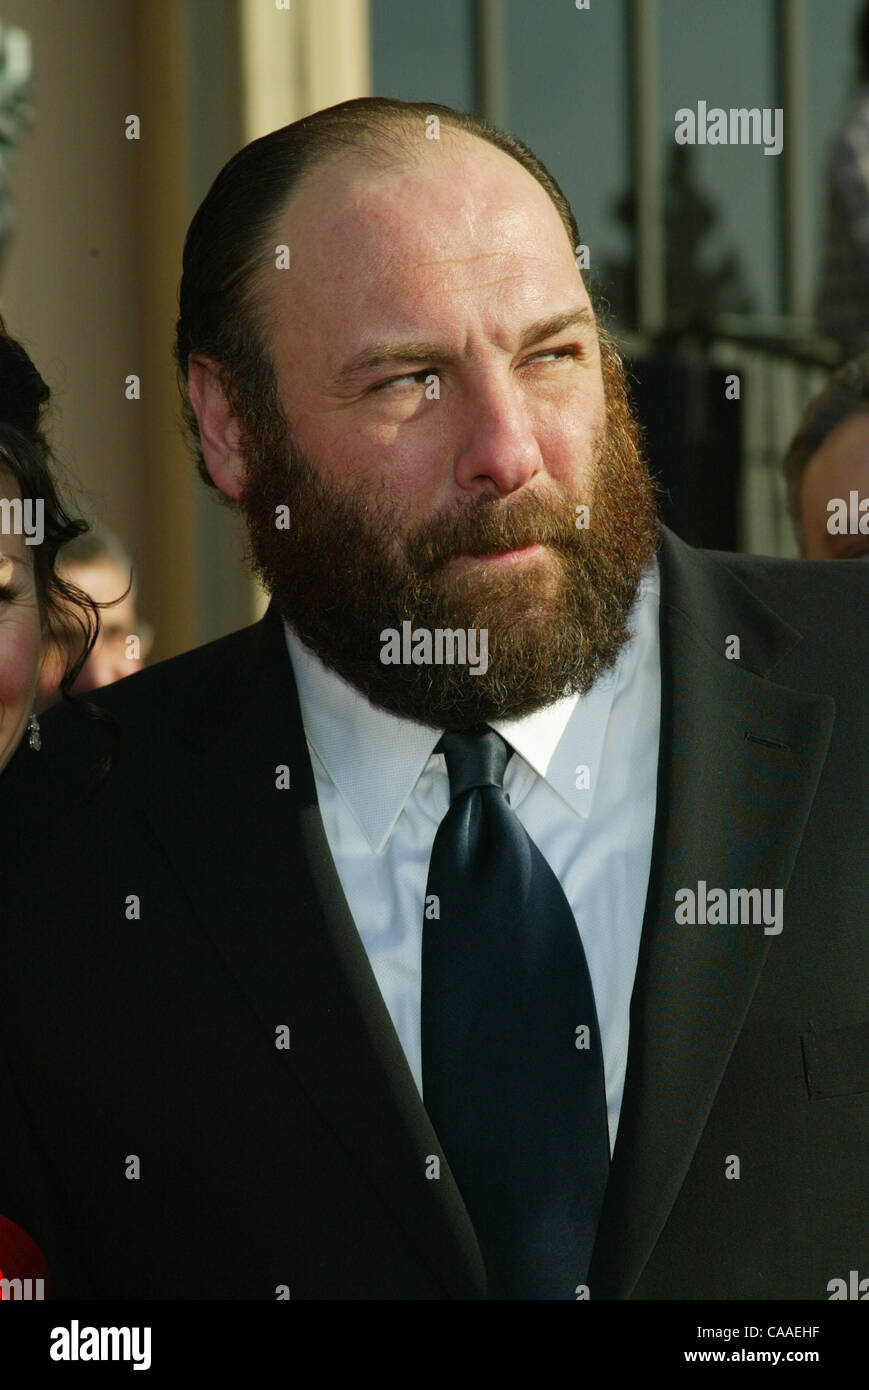 Mar 09, 2003; Los Angeles, CA, USA; Actor JAMES GANDOLFINI arrives @ the 9th Annual Screen Actors Guild Awards held at the Shrine Exposition Center in Los Angeles. Stock Photo